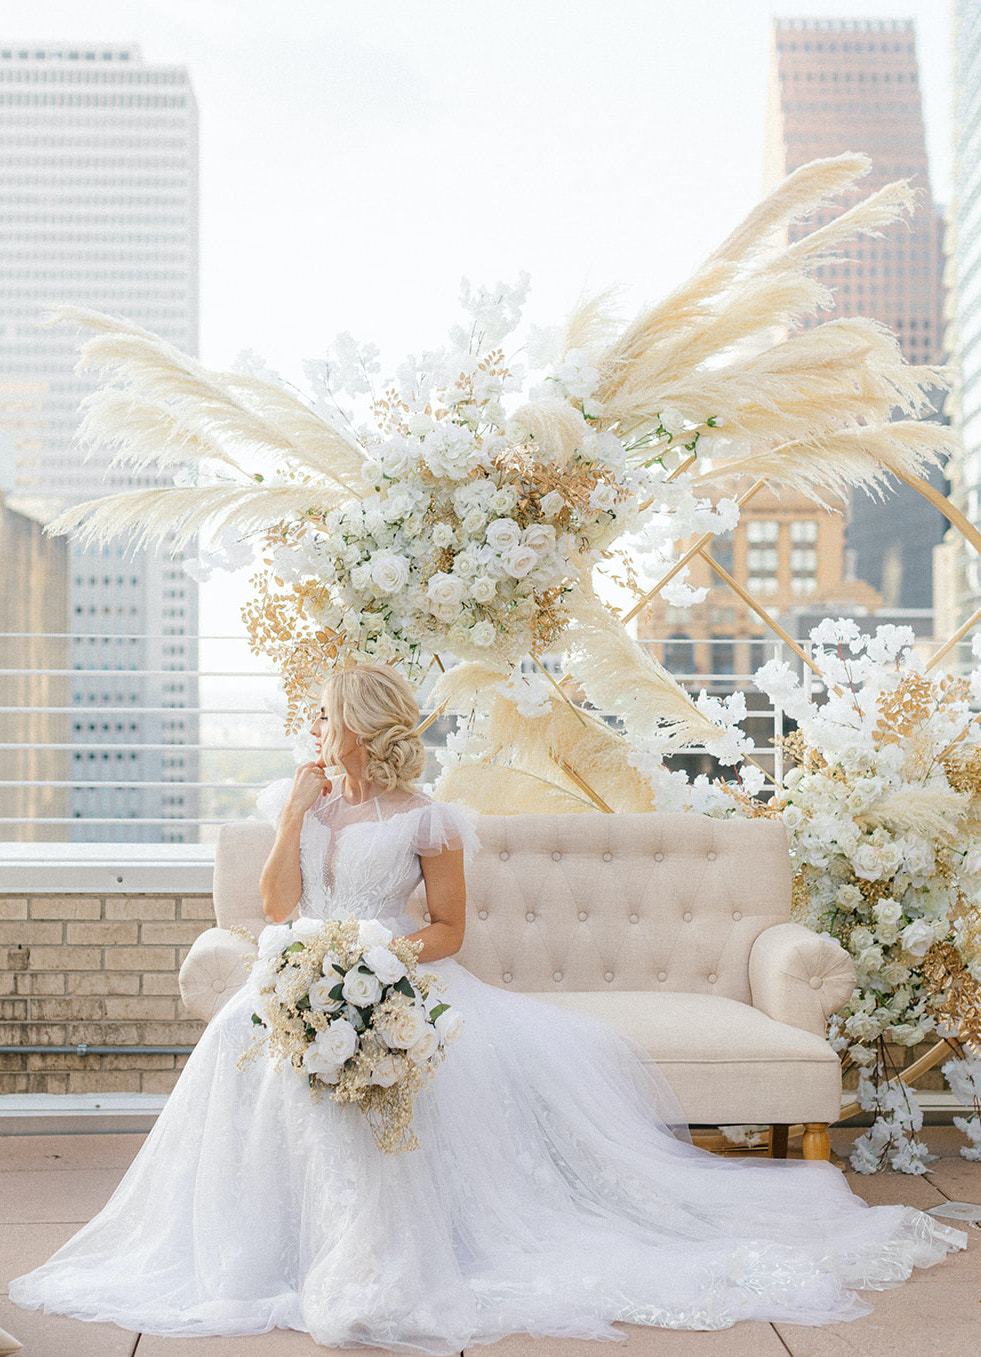 Bride is sitting on a chair decorated with bohemian flowers and pampas grass for the ethereal rooftop wedding styled shoot.